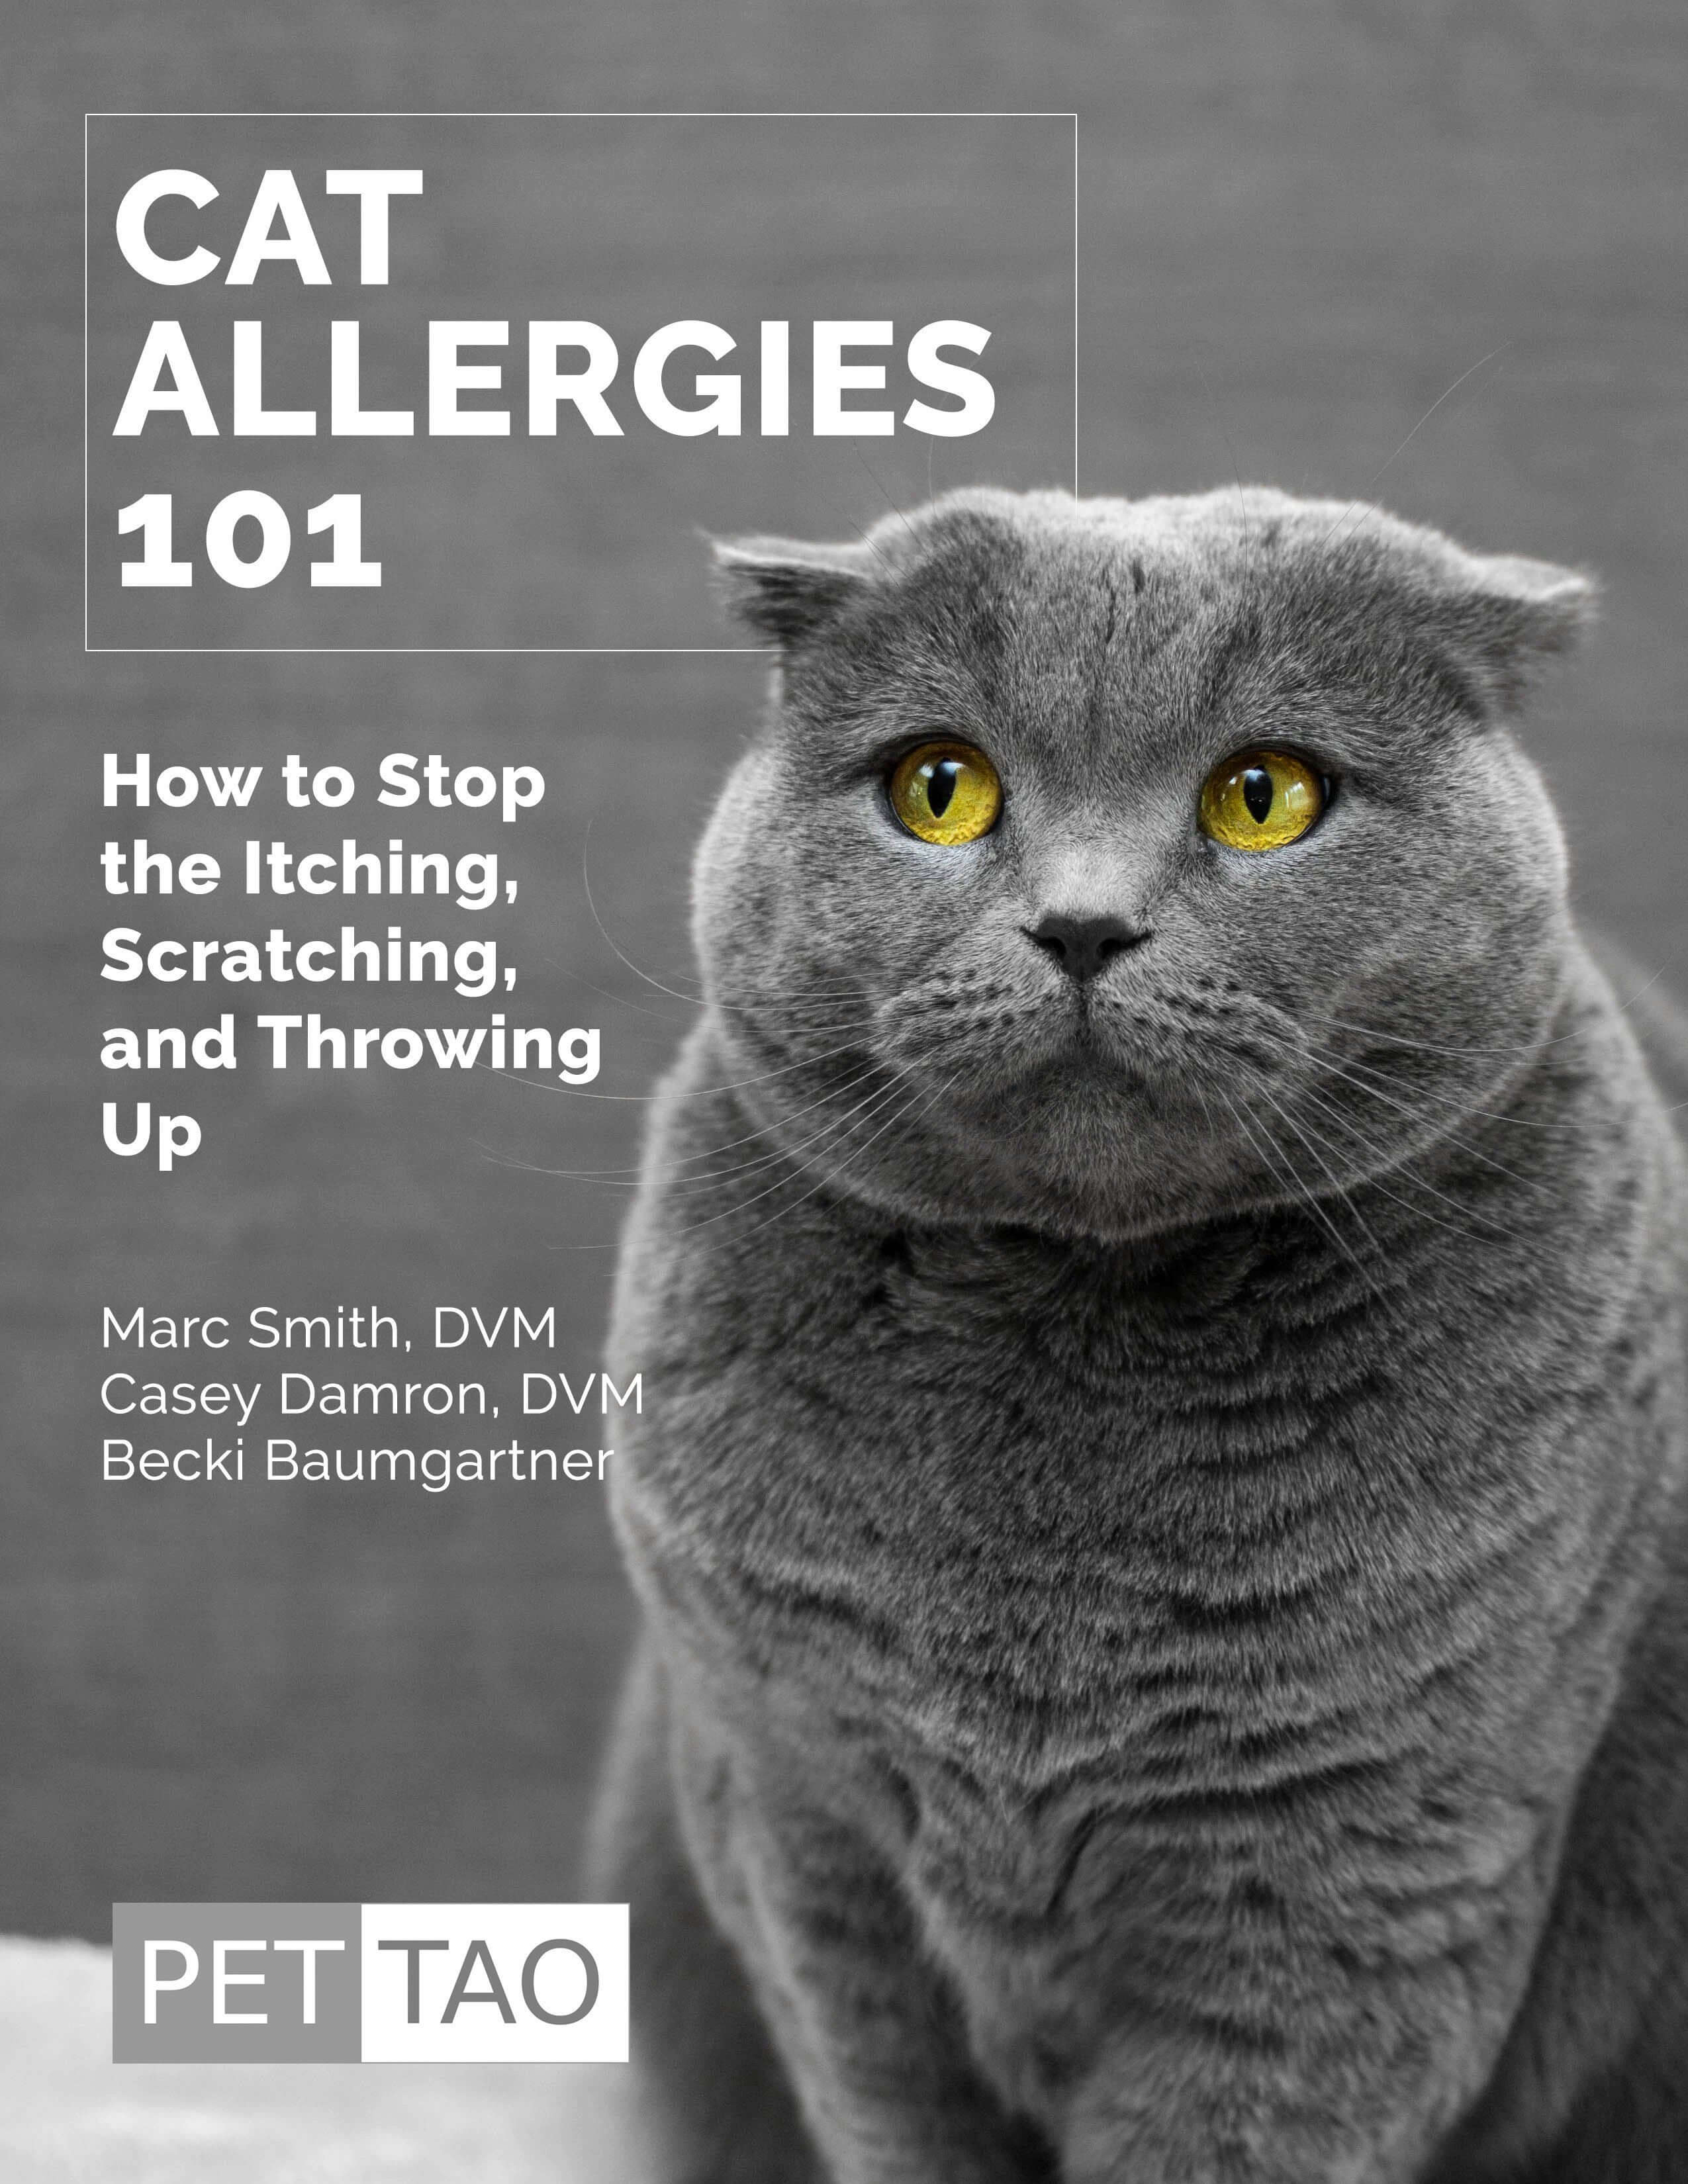 Cat Allergies 101: How to Stop the Itching, Scratching & Throwing Up - Instant Ebook Download